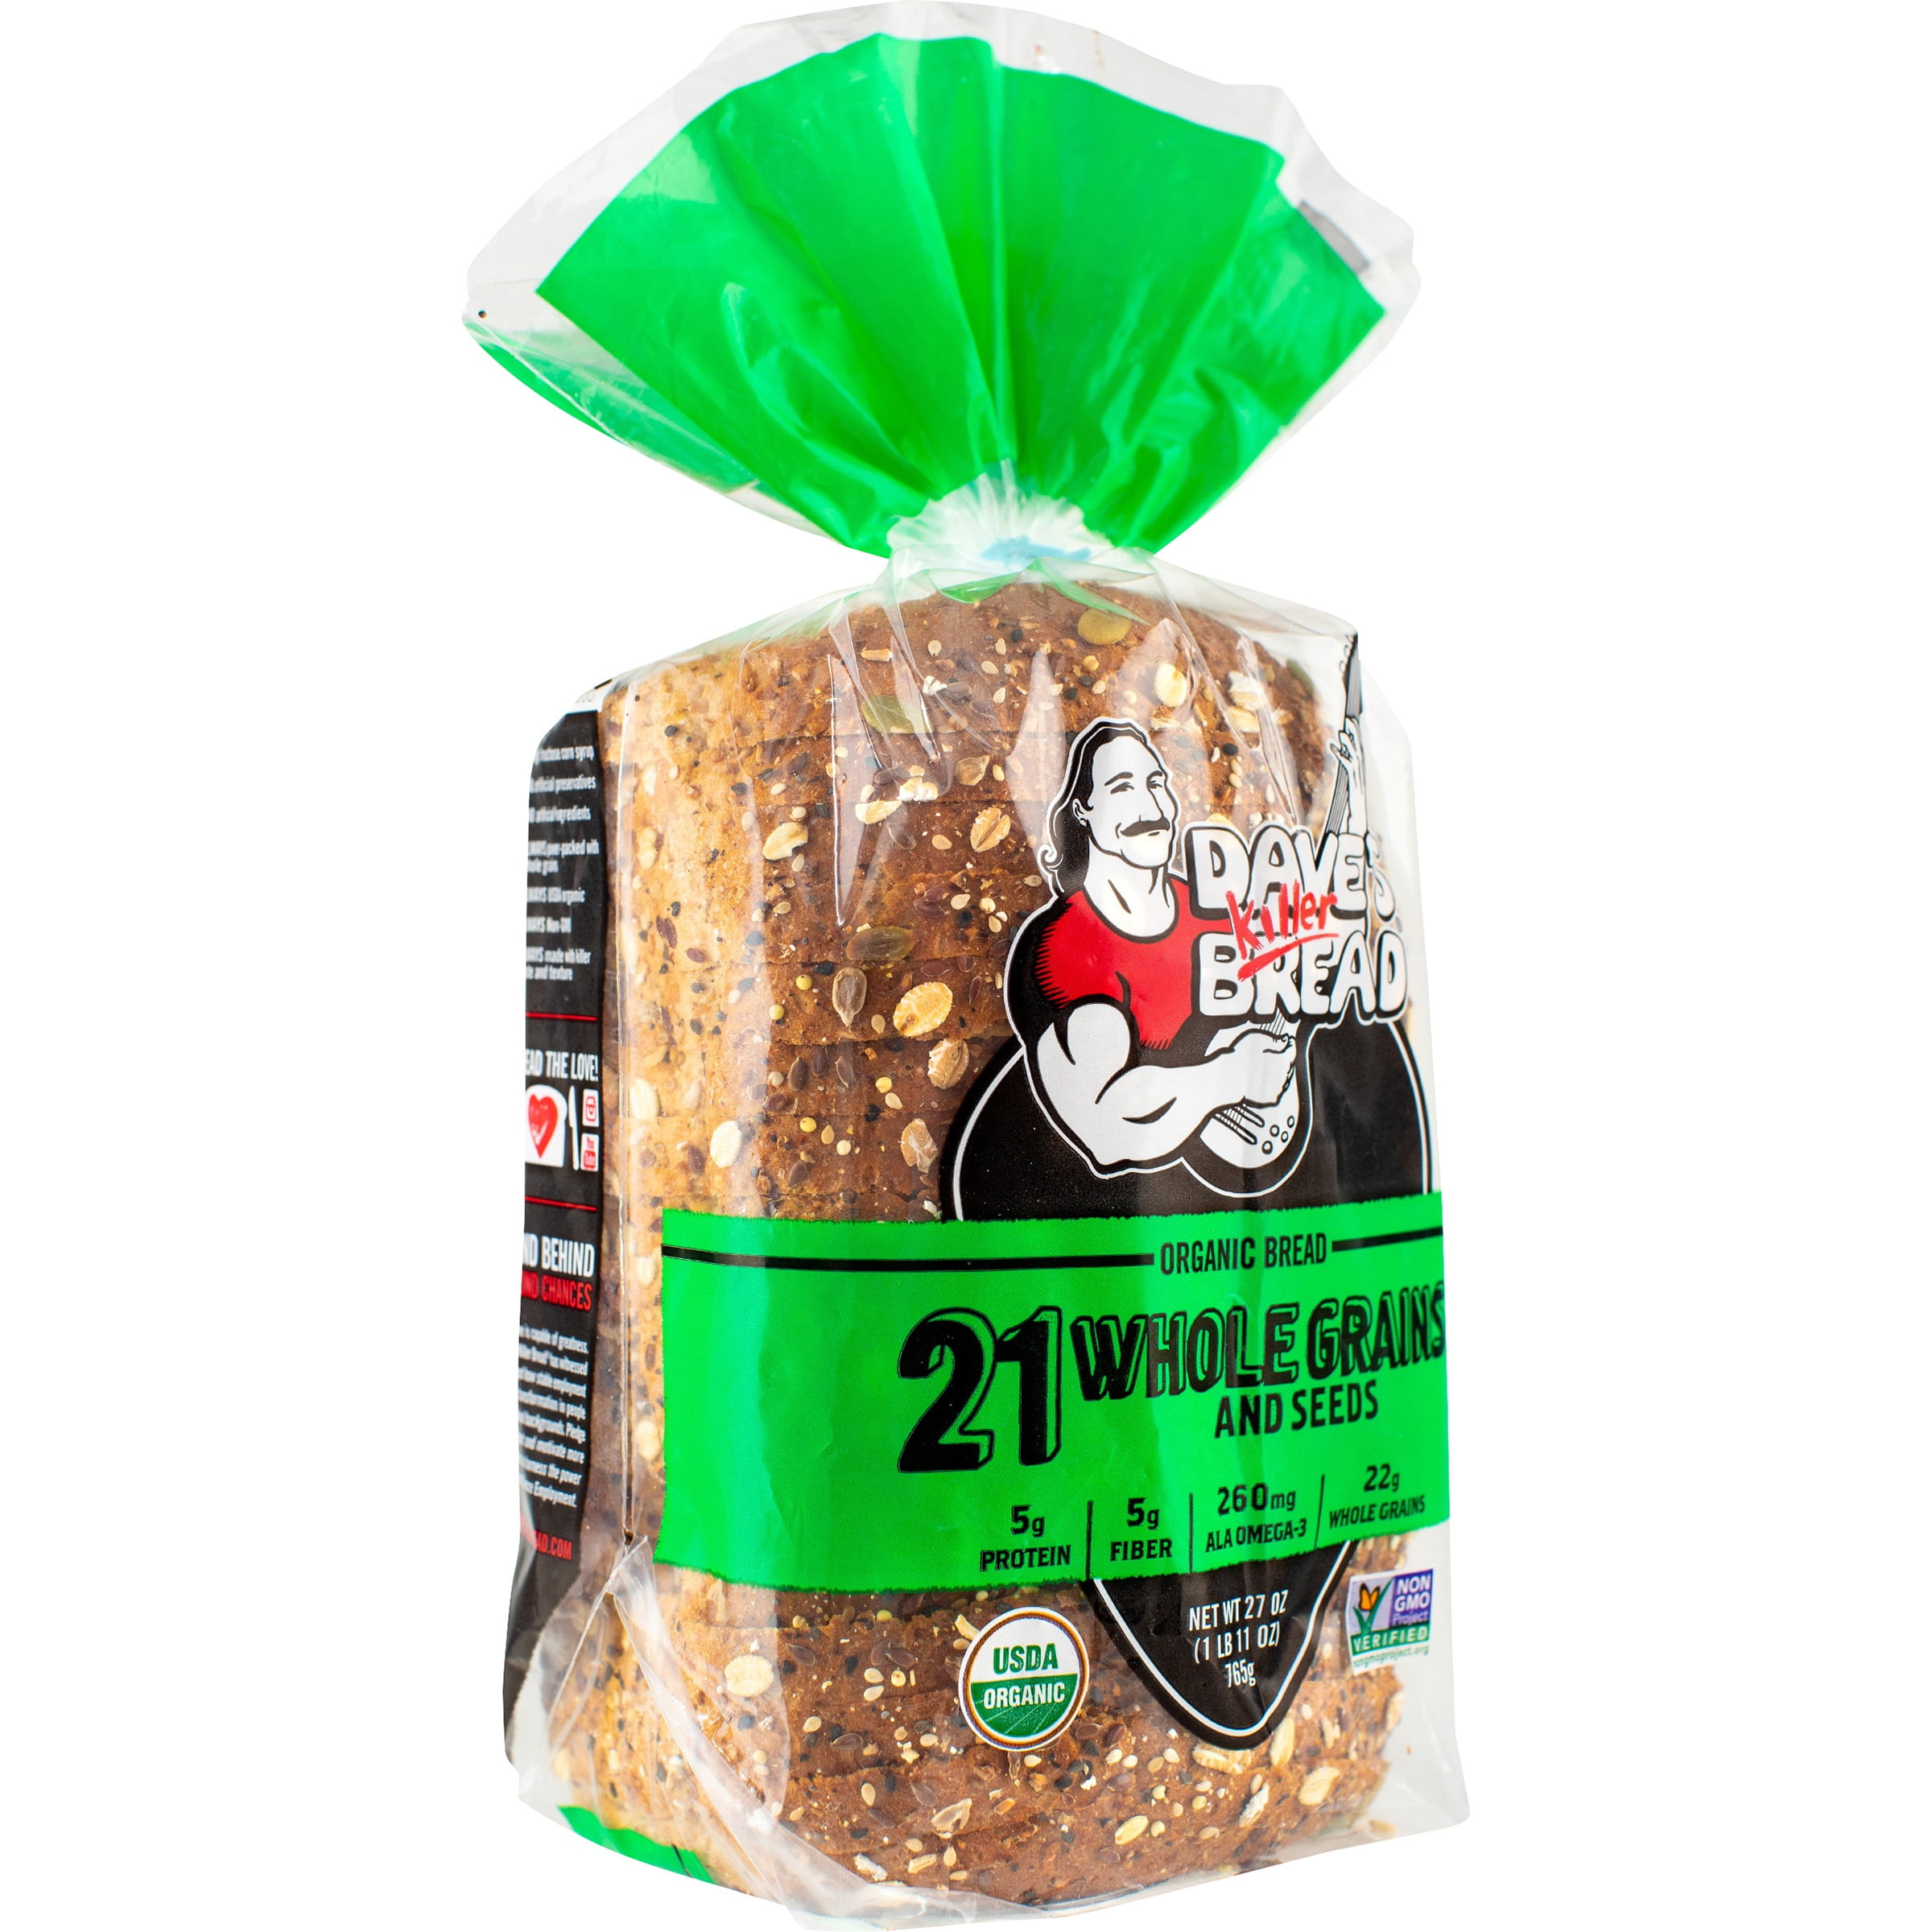 dave-s-killer-bread-21-whole-grains-and-seeds-organic-bread-27-oz